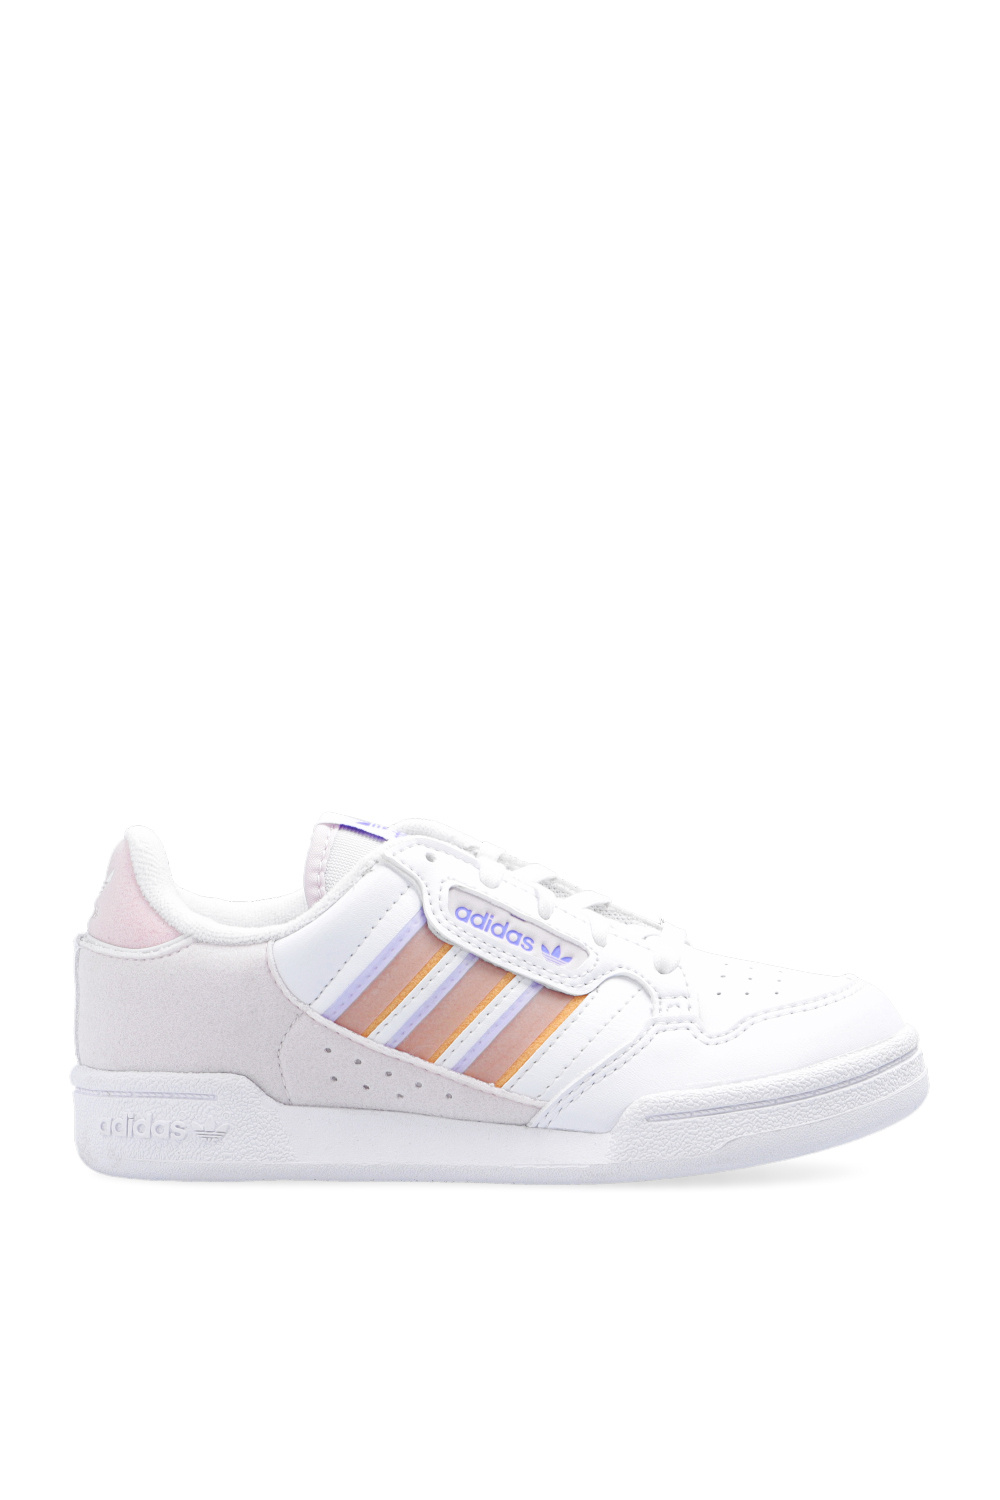 adidas jeremy Kids ‘Continental 80 Stripes C’ sneakers